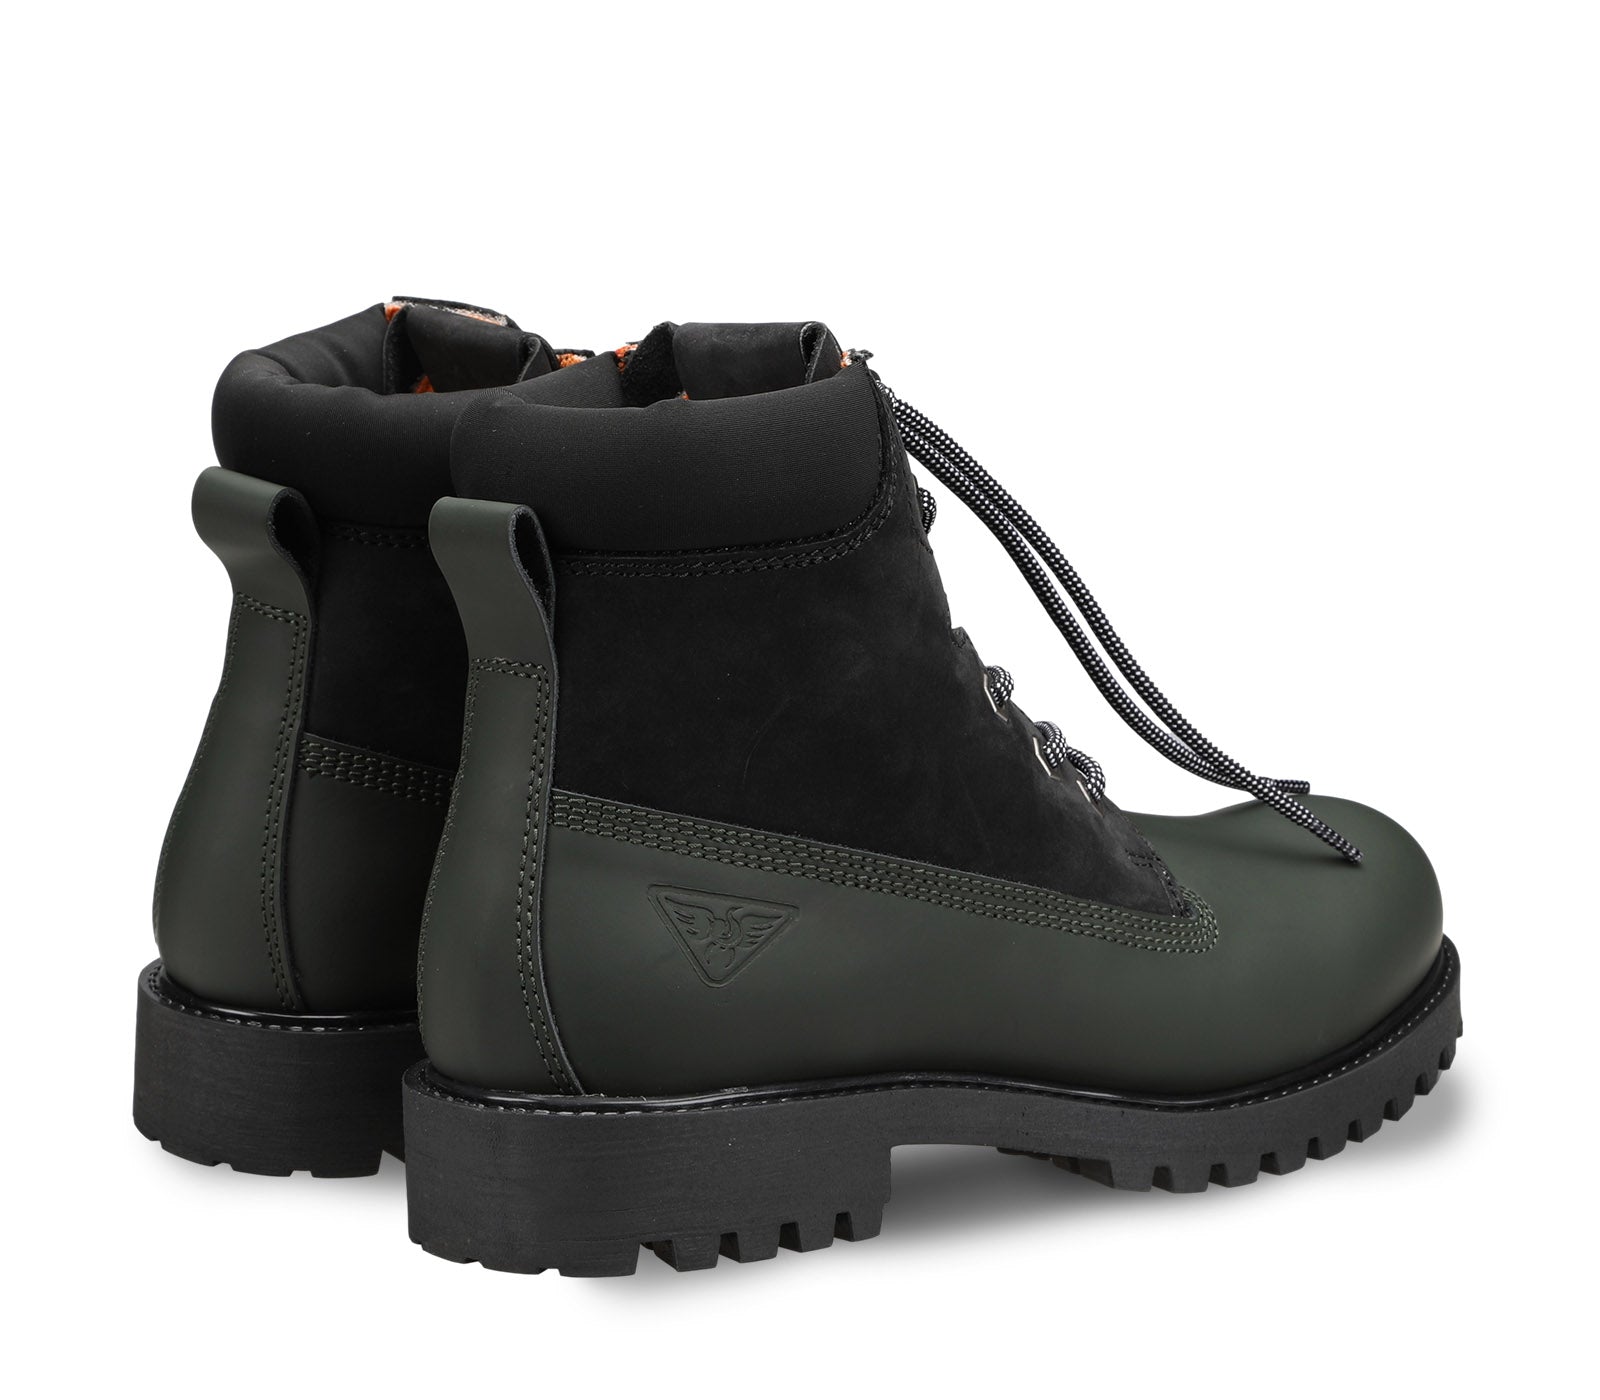 Green Men's Rubberized Leather Boot with Cord-Stopper Closure